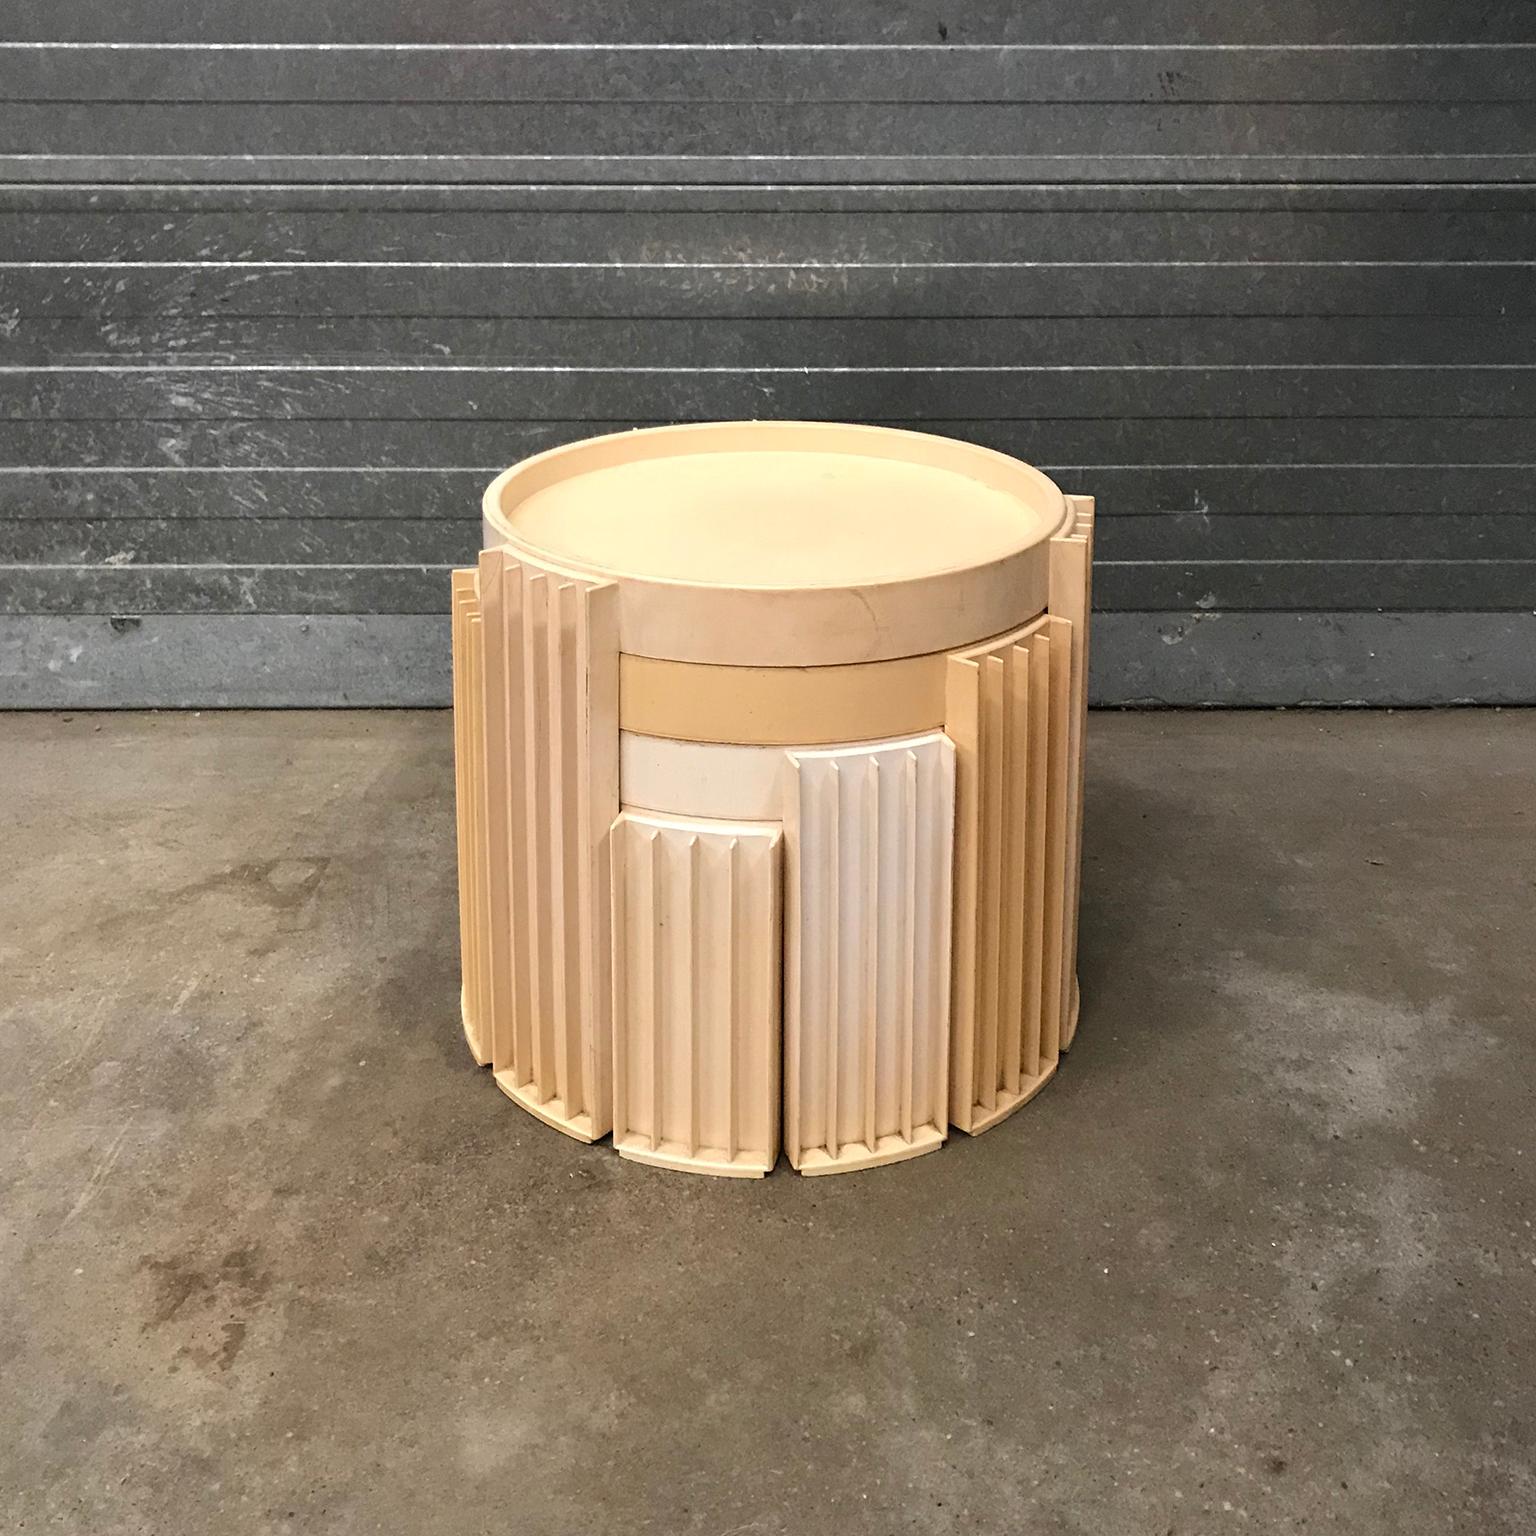 This tables are part of the private collection of Casey Godrie and is situated in his private house. 
Ask him for competitive shipping quotes. His incredible Dune Villa, Amsterdam Beach, check last two pictures of this listing or  find more details